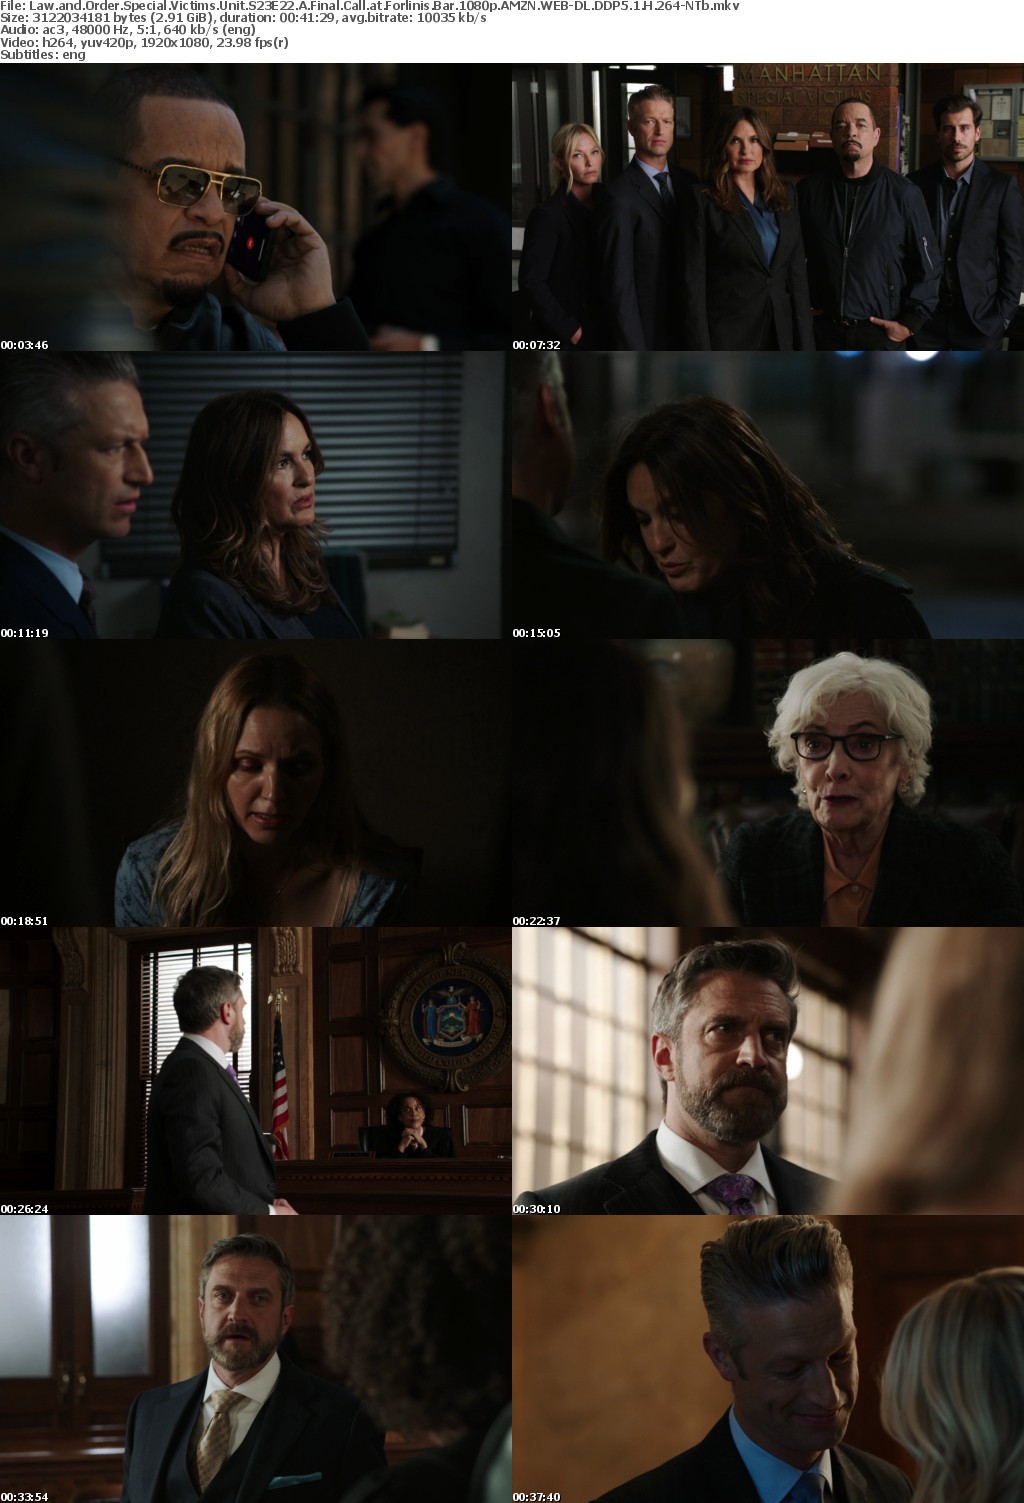 Law and Order SVU S23E22 A Final Call at Forlinis Bar 1080p AMZN WEBRip DDP5 1 x264